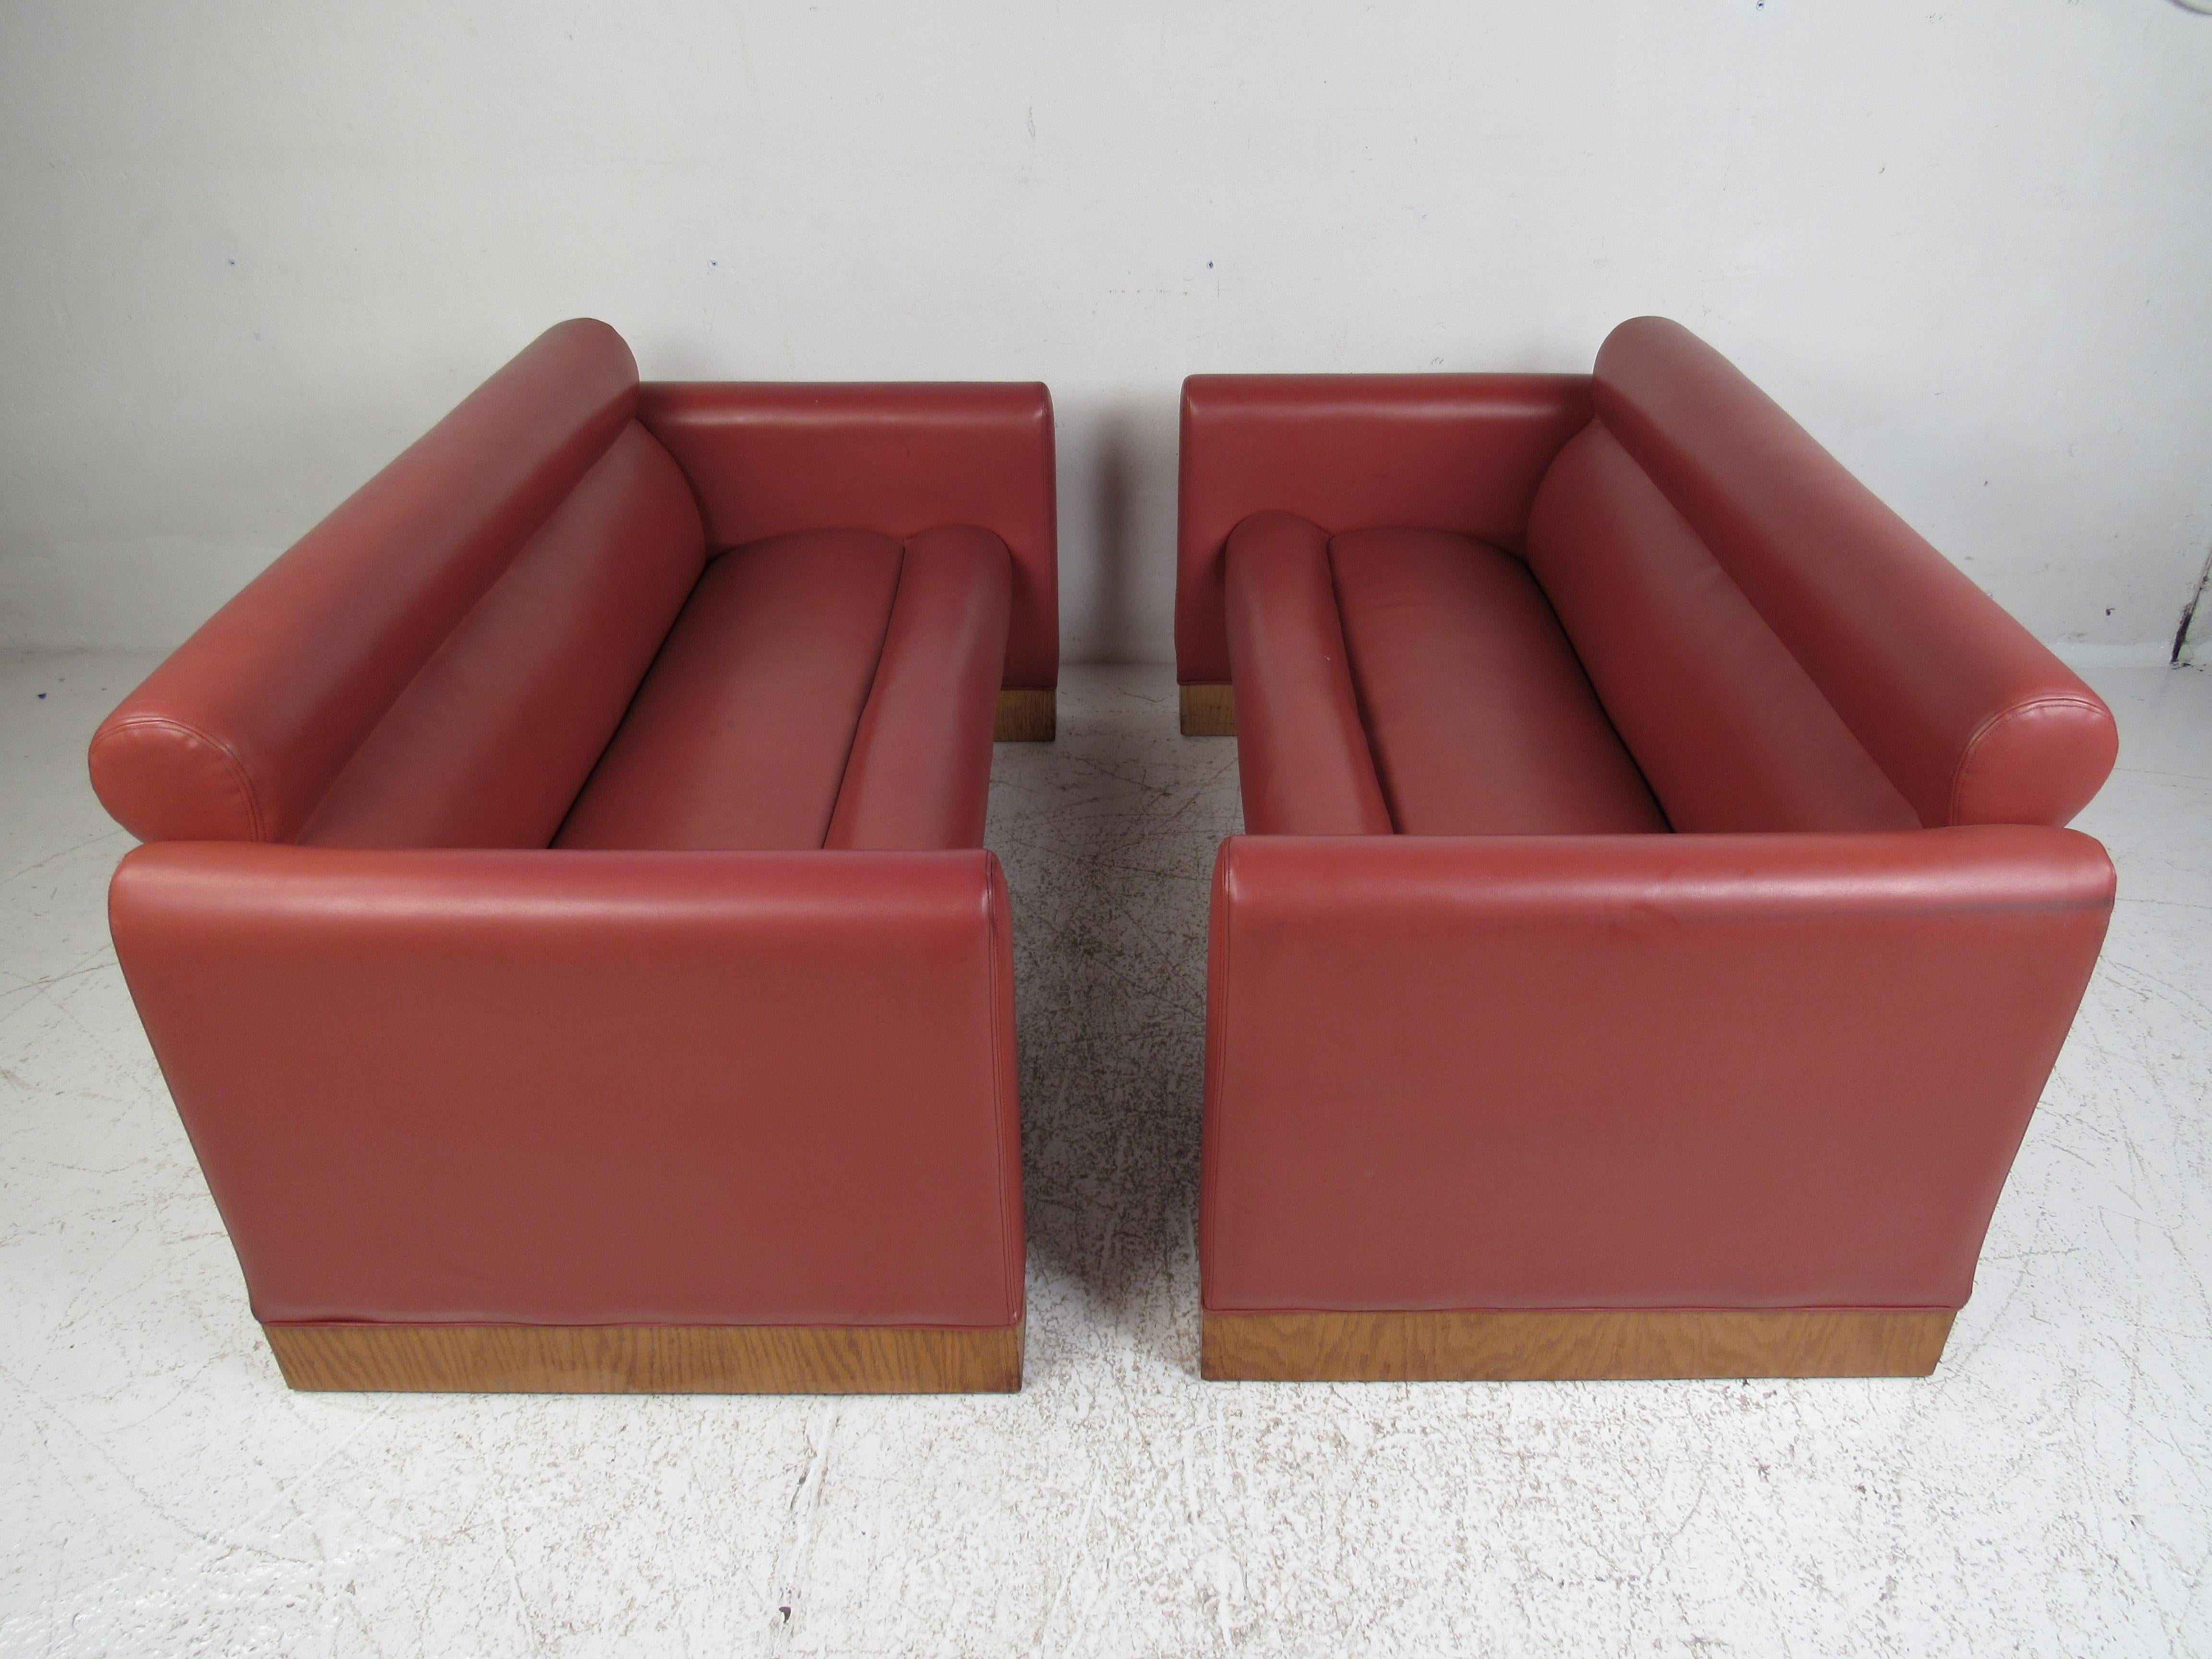 This beautiful vintage modern pair of sofas feature pink vinyl upholstery and a base with wood trim. A sleek and comfortable design that makes a statement in any seating arrangement. Please confirm item location (NY or NJ).